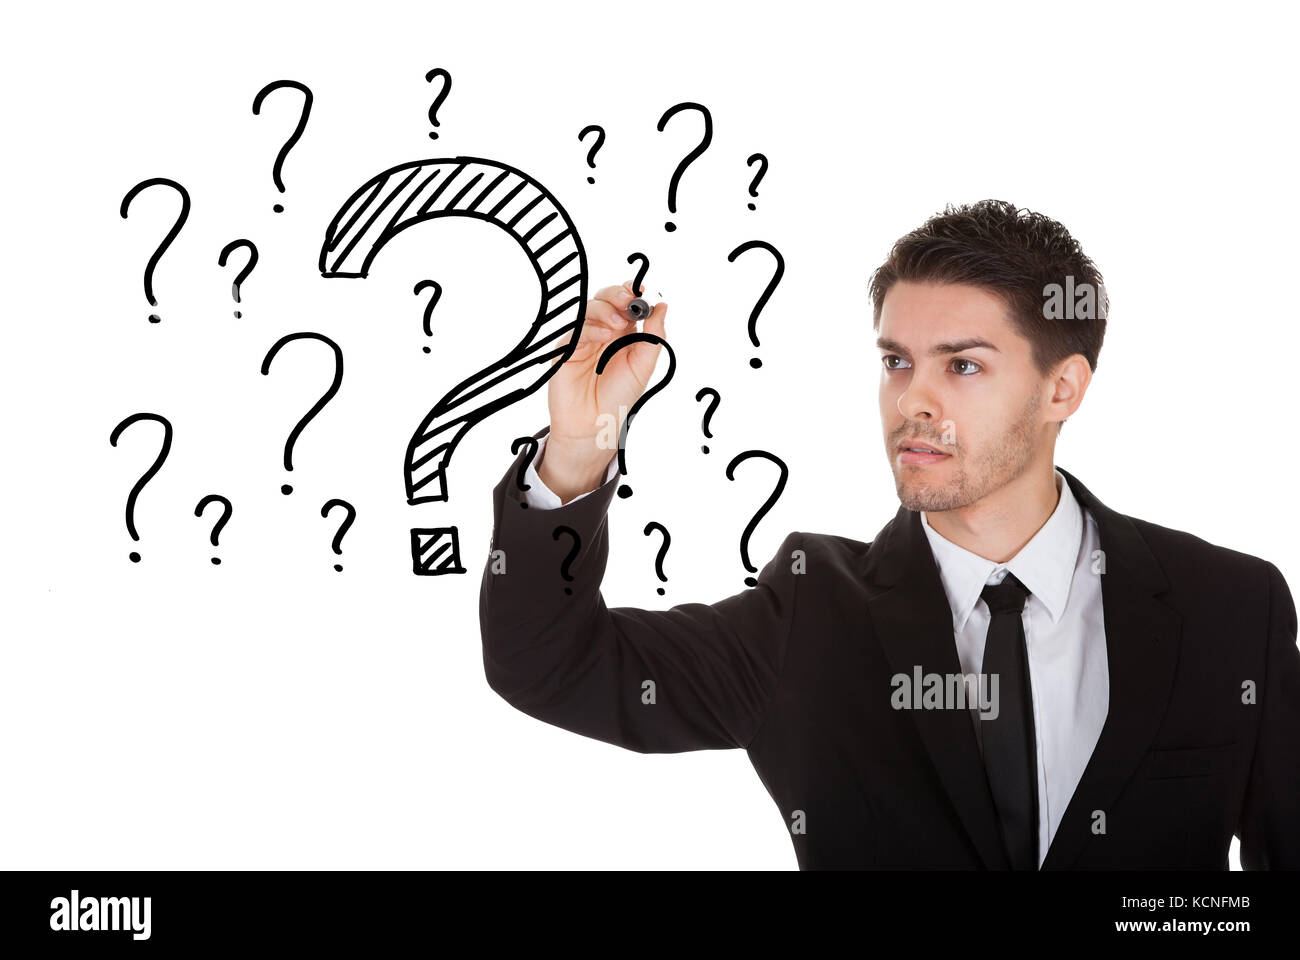 Man writing lots of questions on white screen Stock Photo